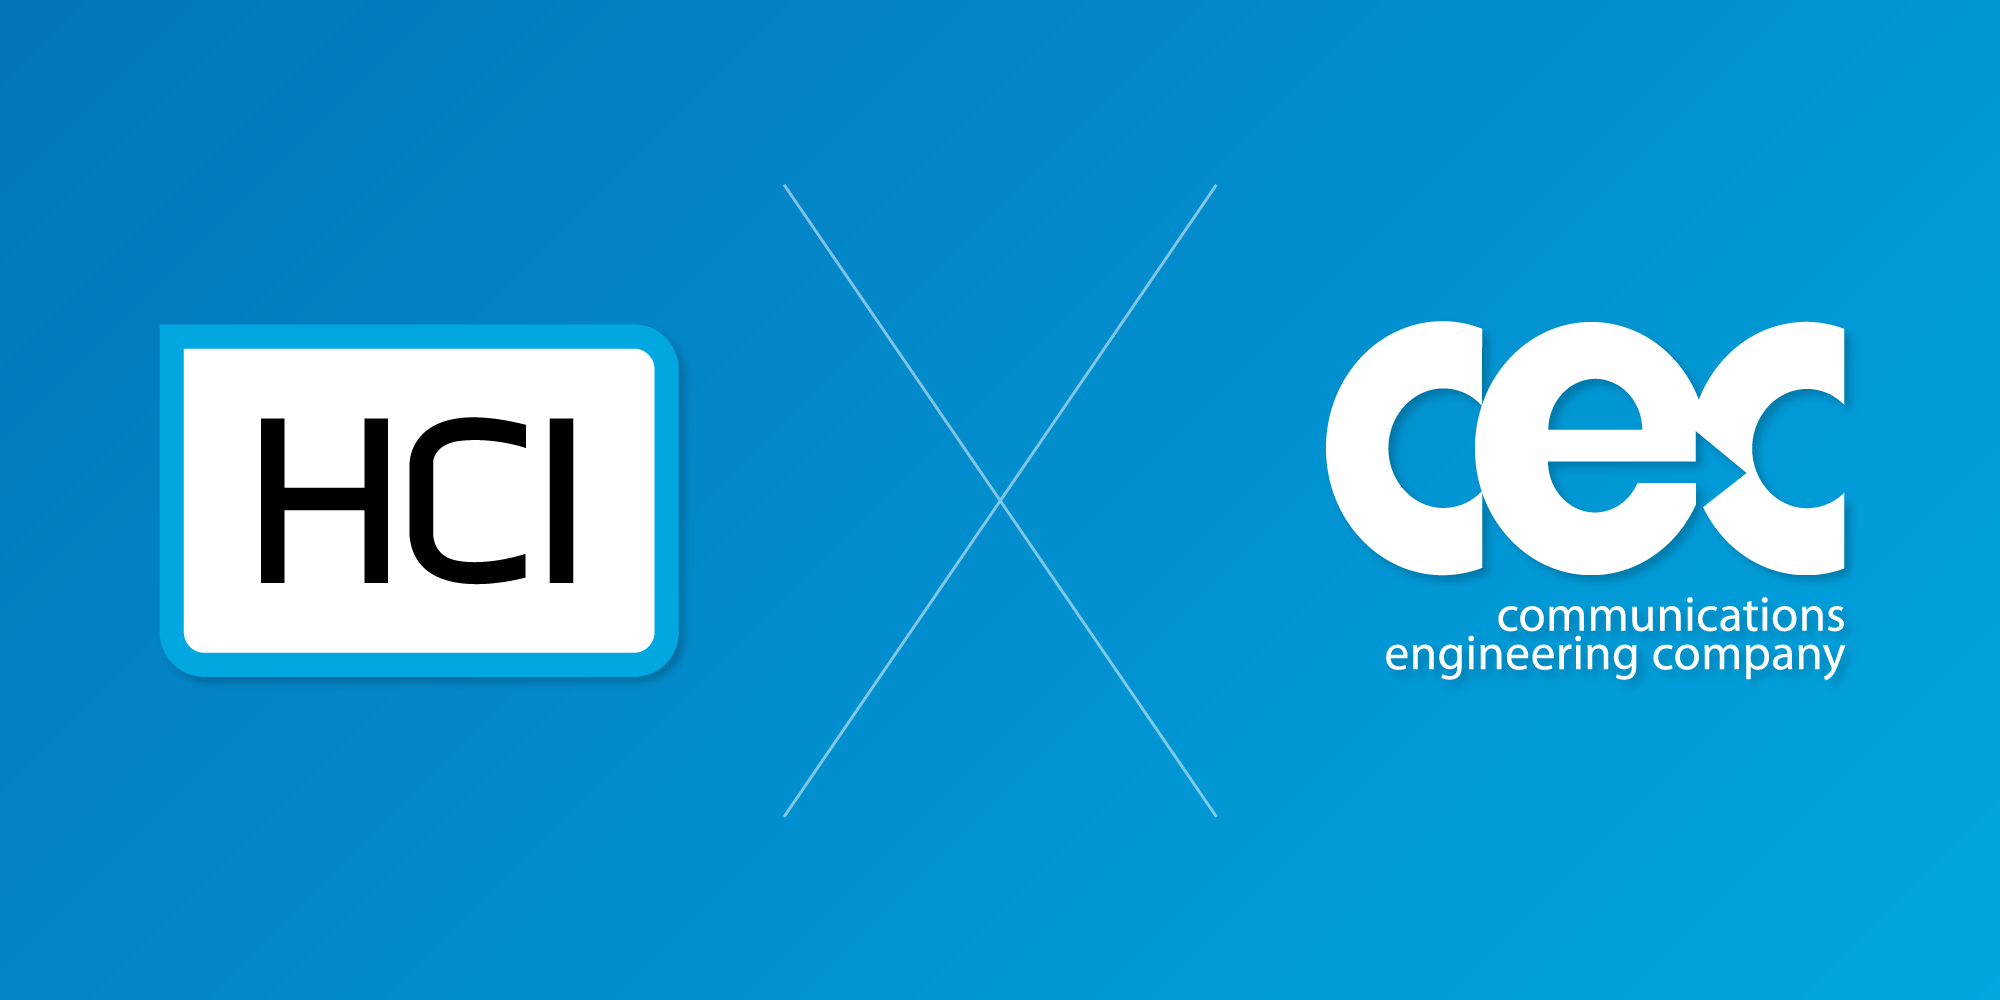 Communications Engineering Company (CEC) partners with HCI